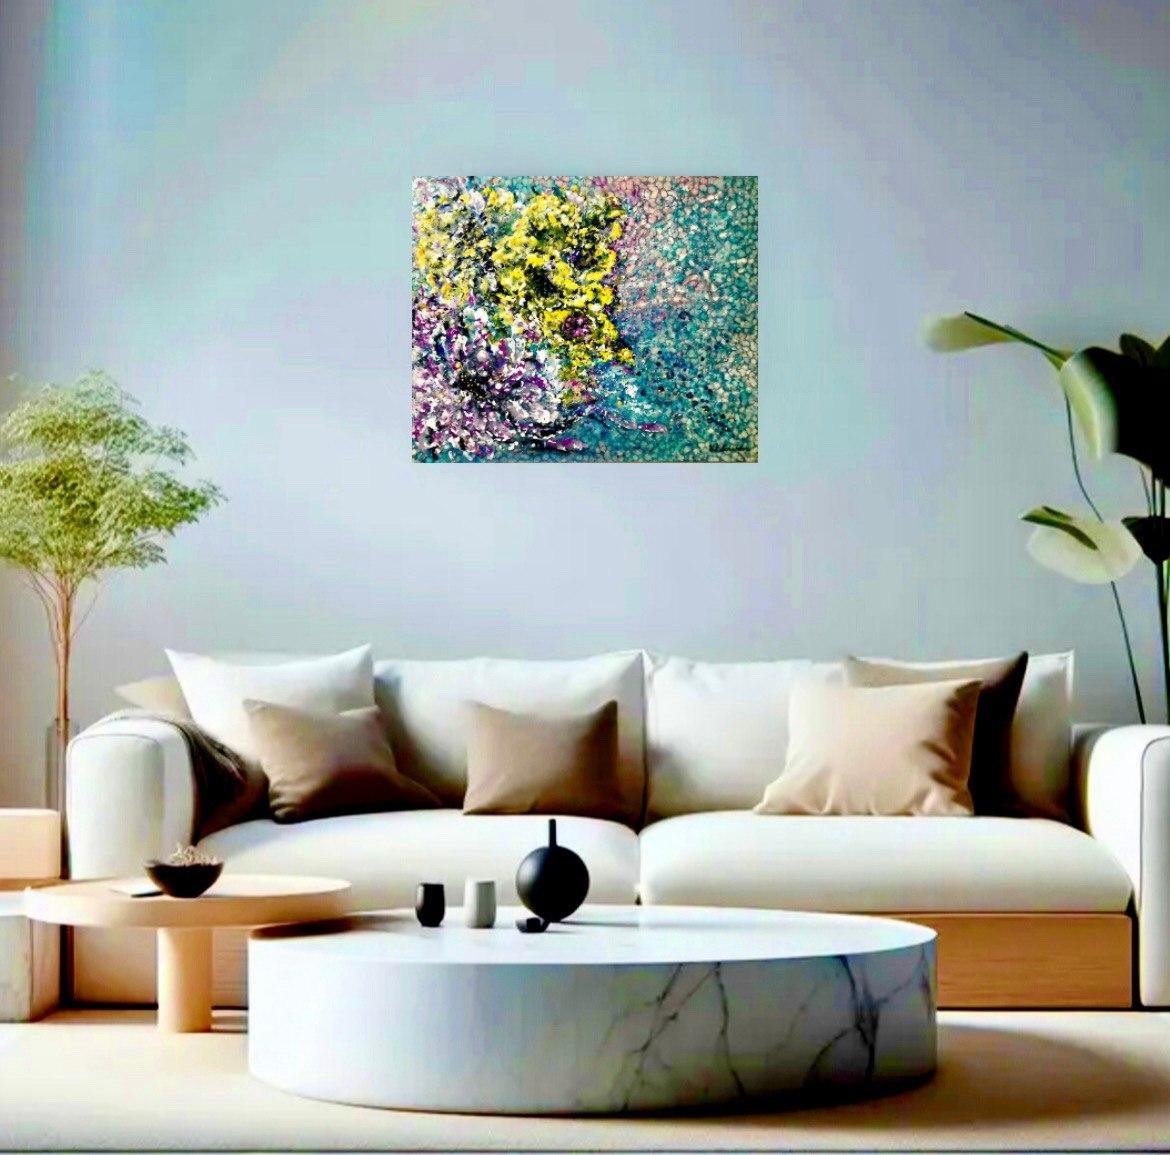 Water Flowers. Encaustic (hot wax) Impressionism. Sea / Flora / Abstract  - Painting by Vik Schroeder 